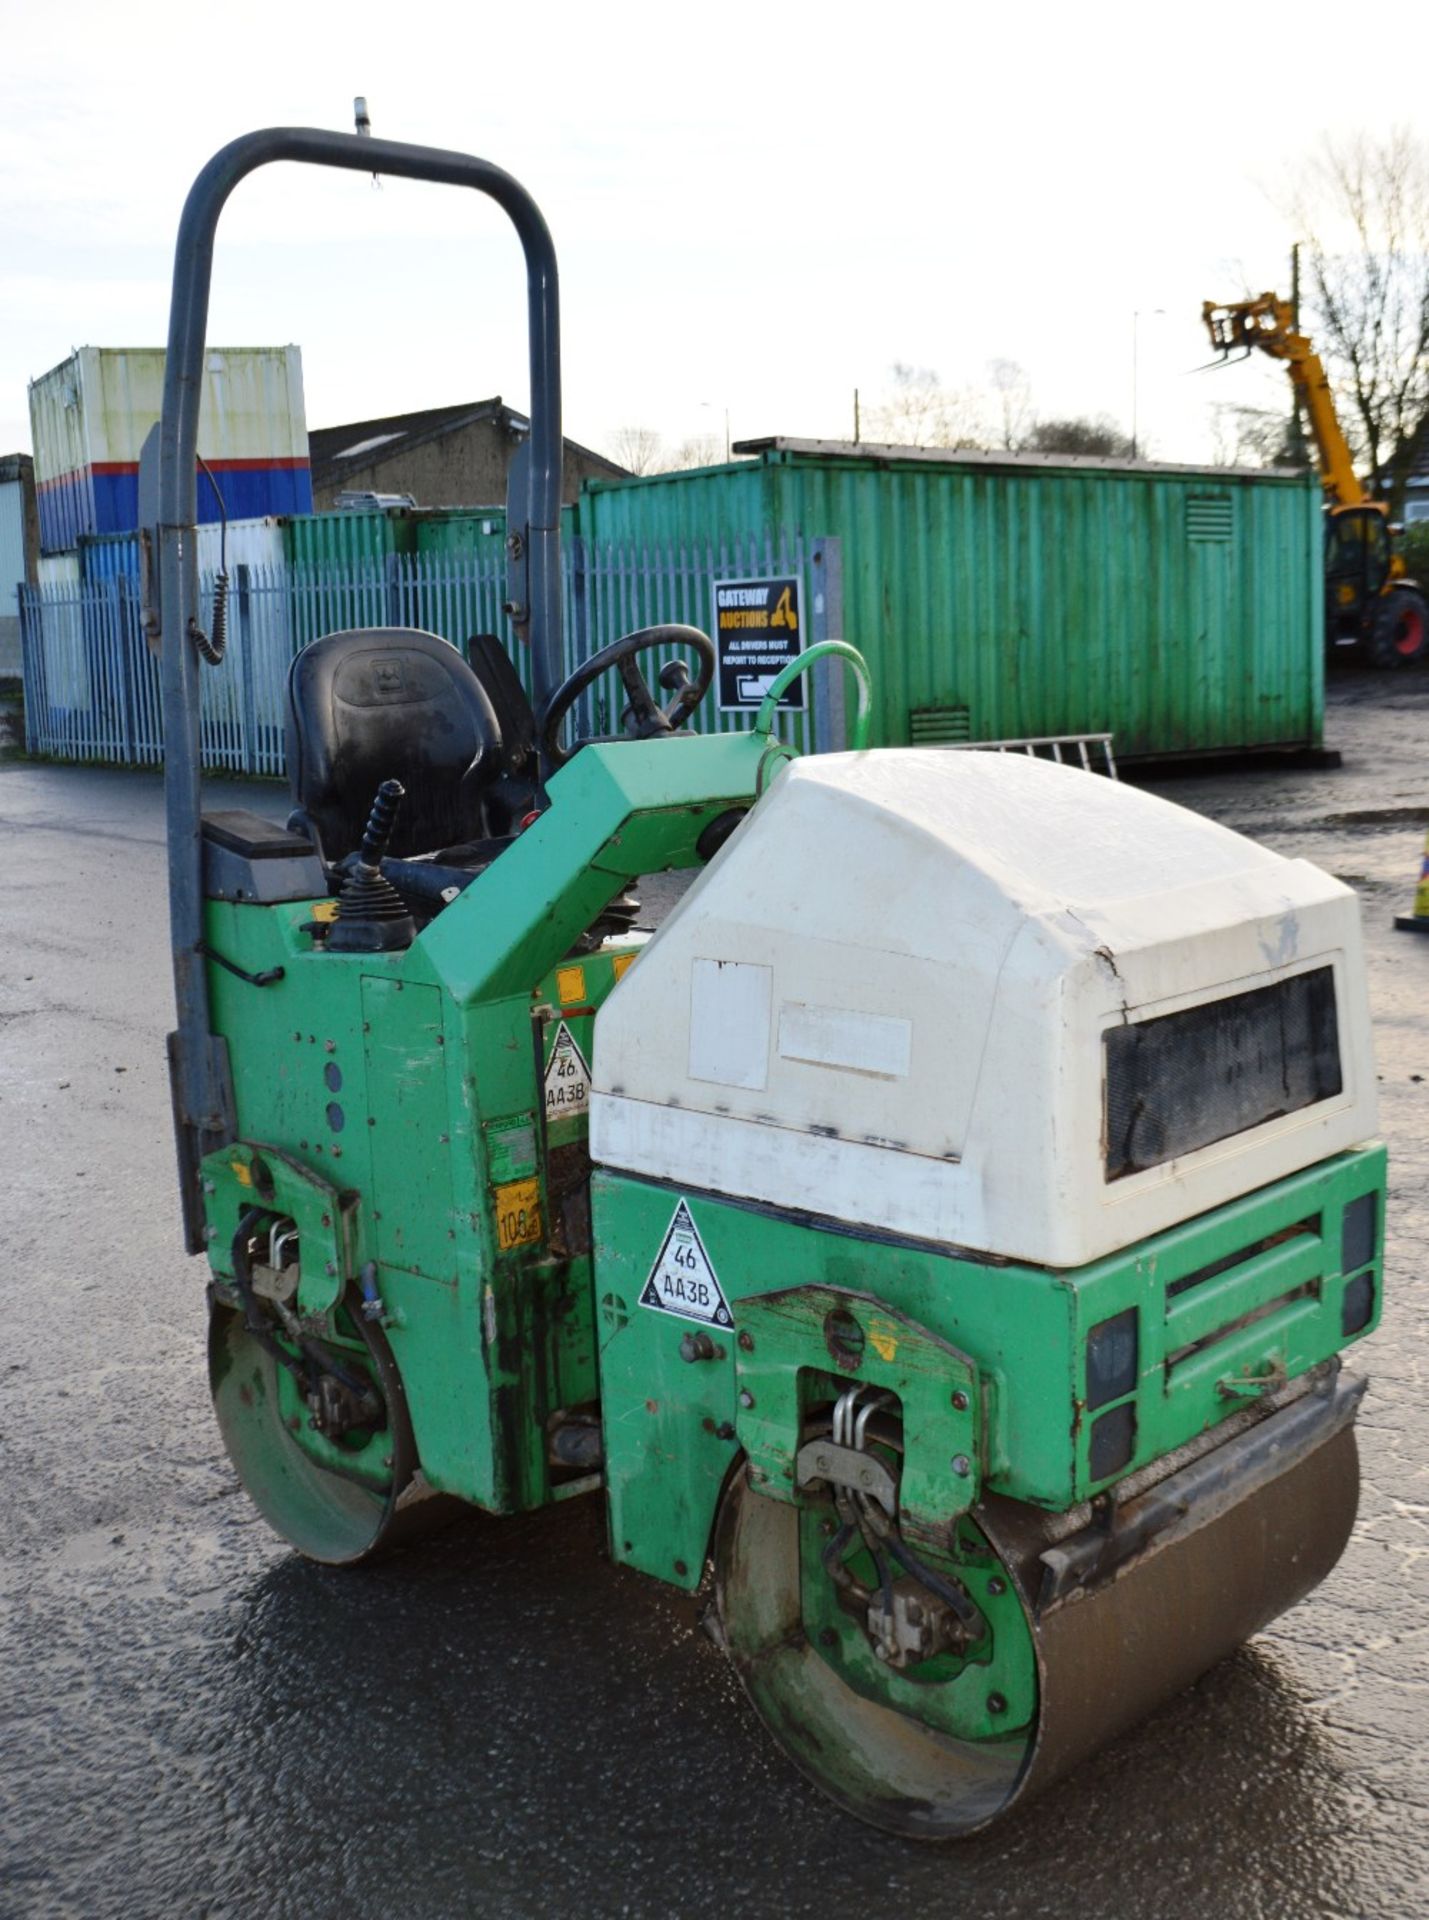 Benford Terex TV800 double drum ride on roller
Year: 2007
S/N: E710HU216
Recorded Hours: 583 - Image 4 of 7